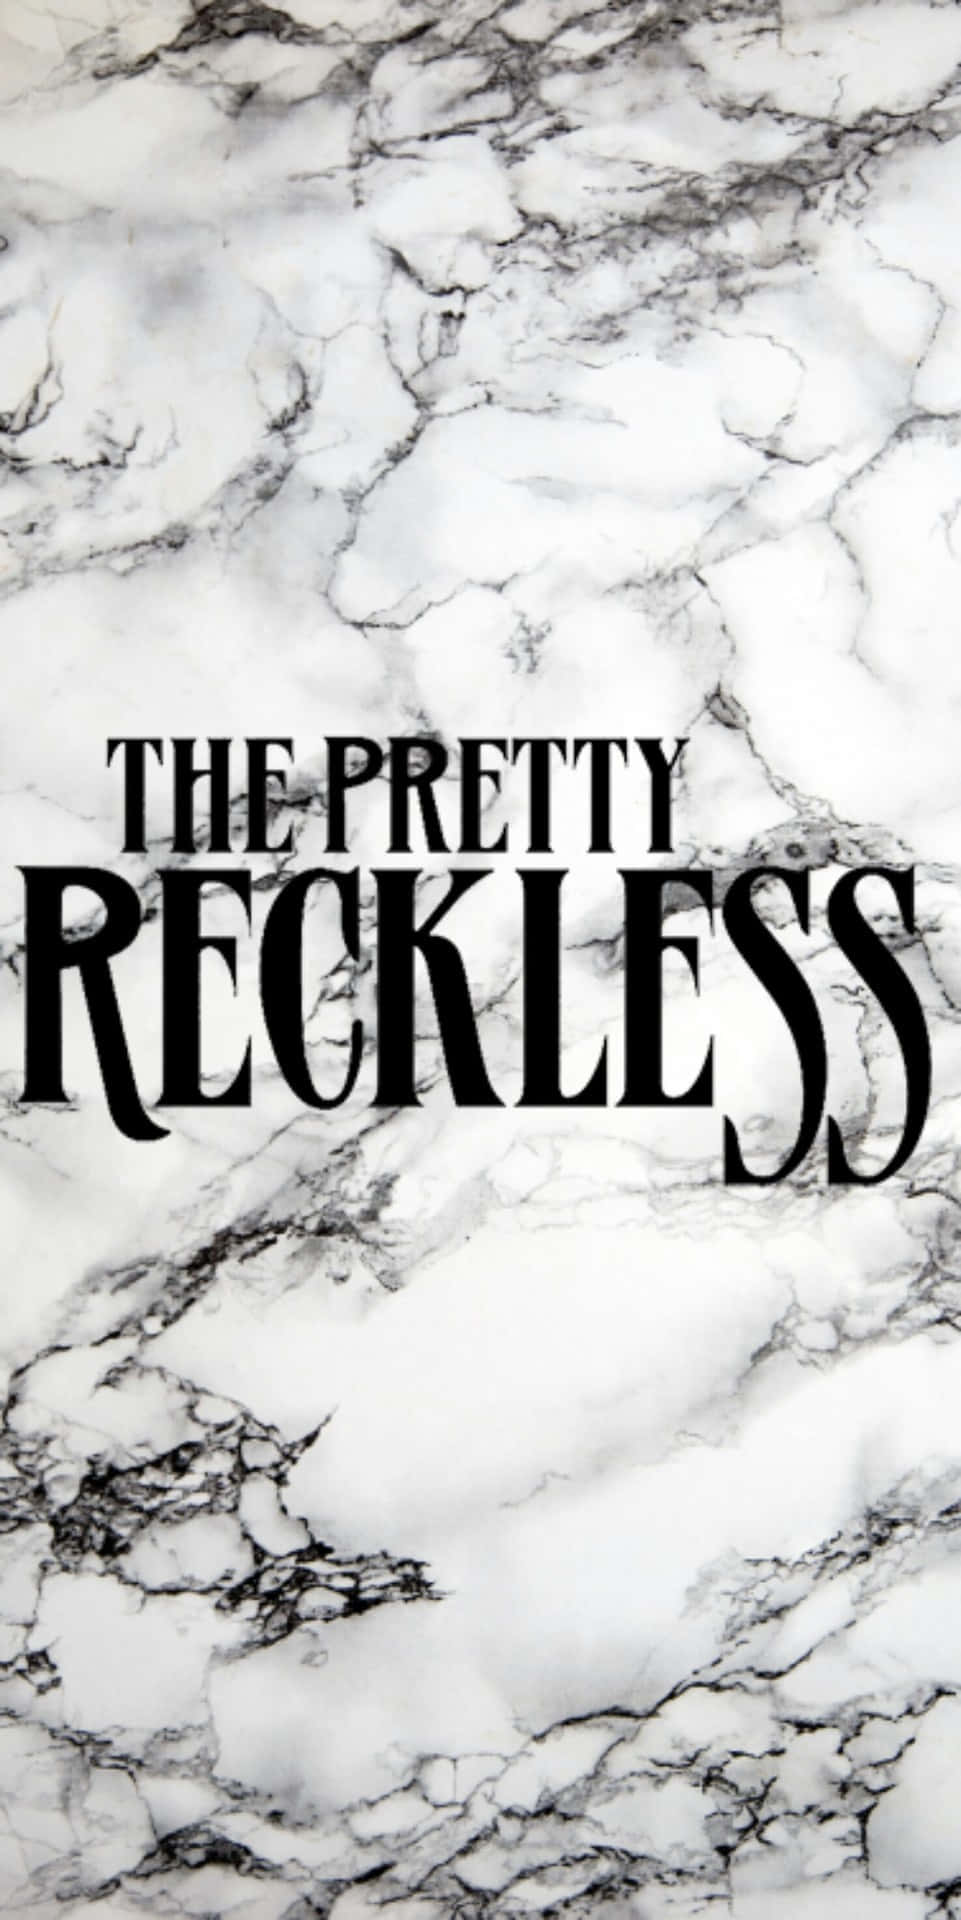 The Pretty Reckless Band Name In Marble Texture Wallpaper